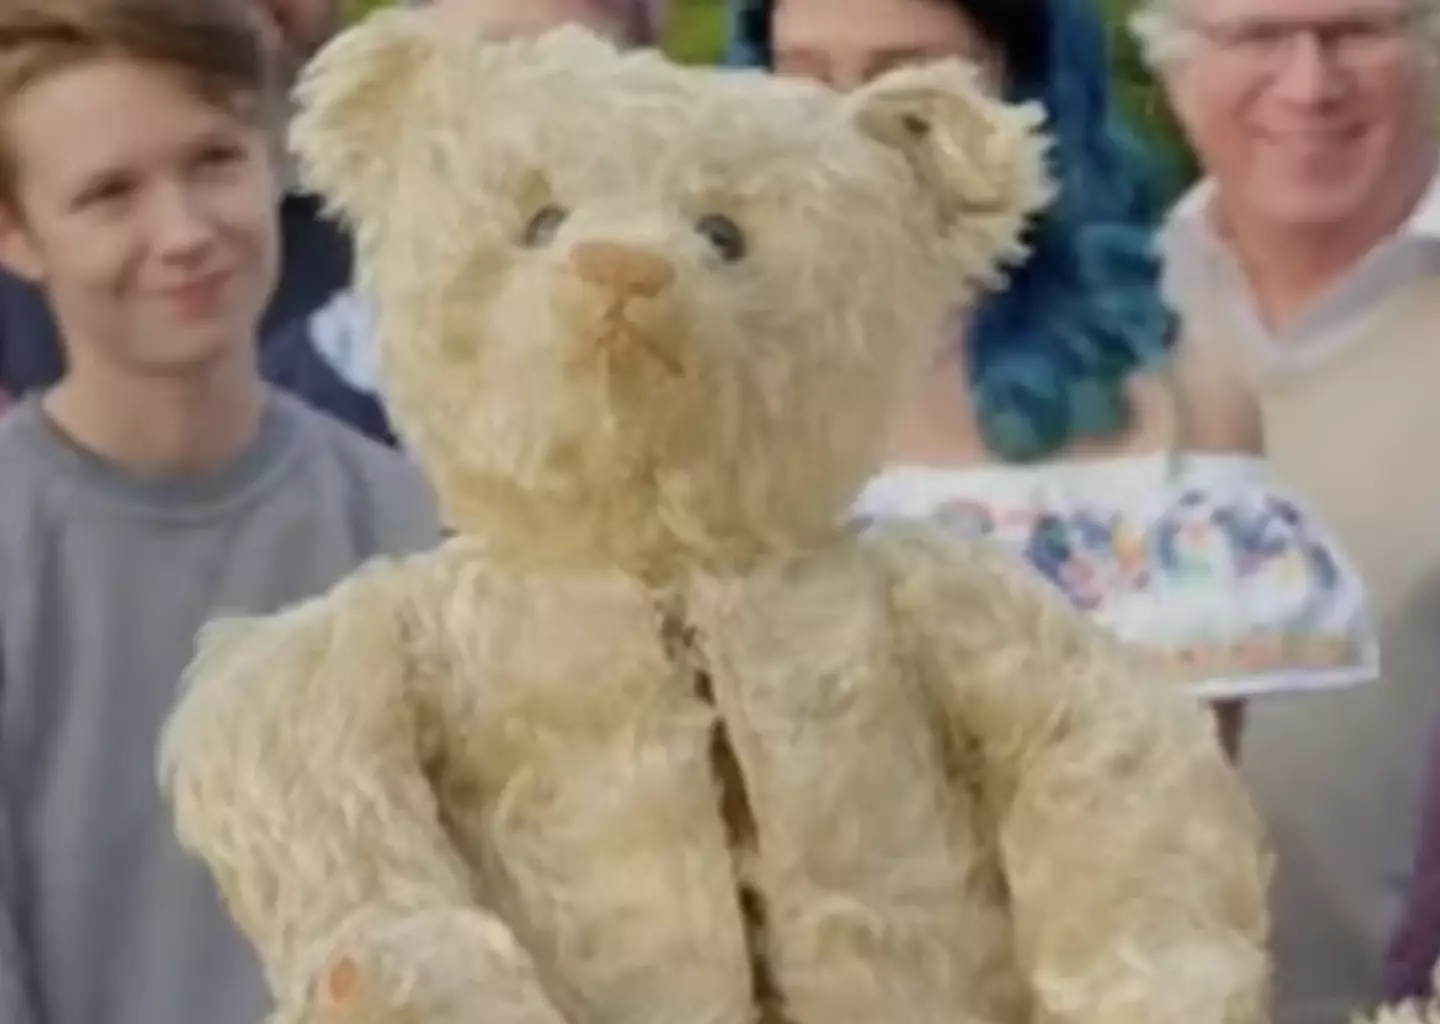 The teddy bear was made by Steiff, who are now known for making teddies for Louis Vuitton.